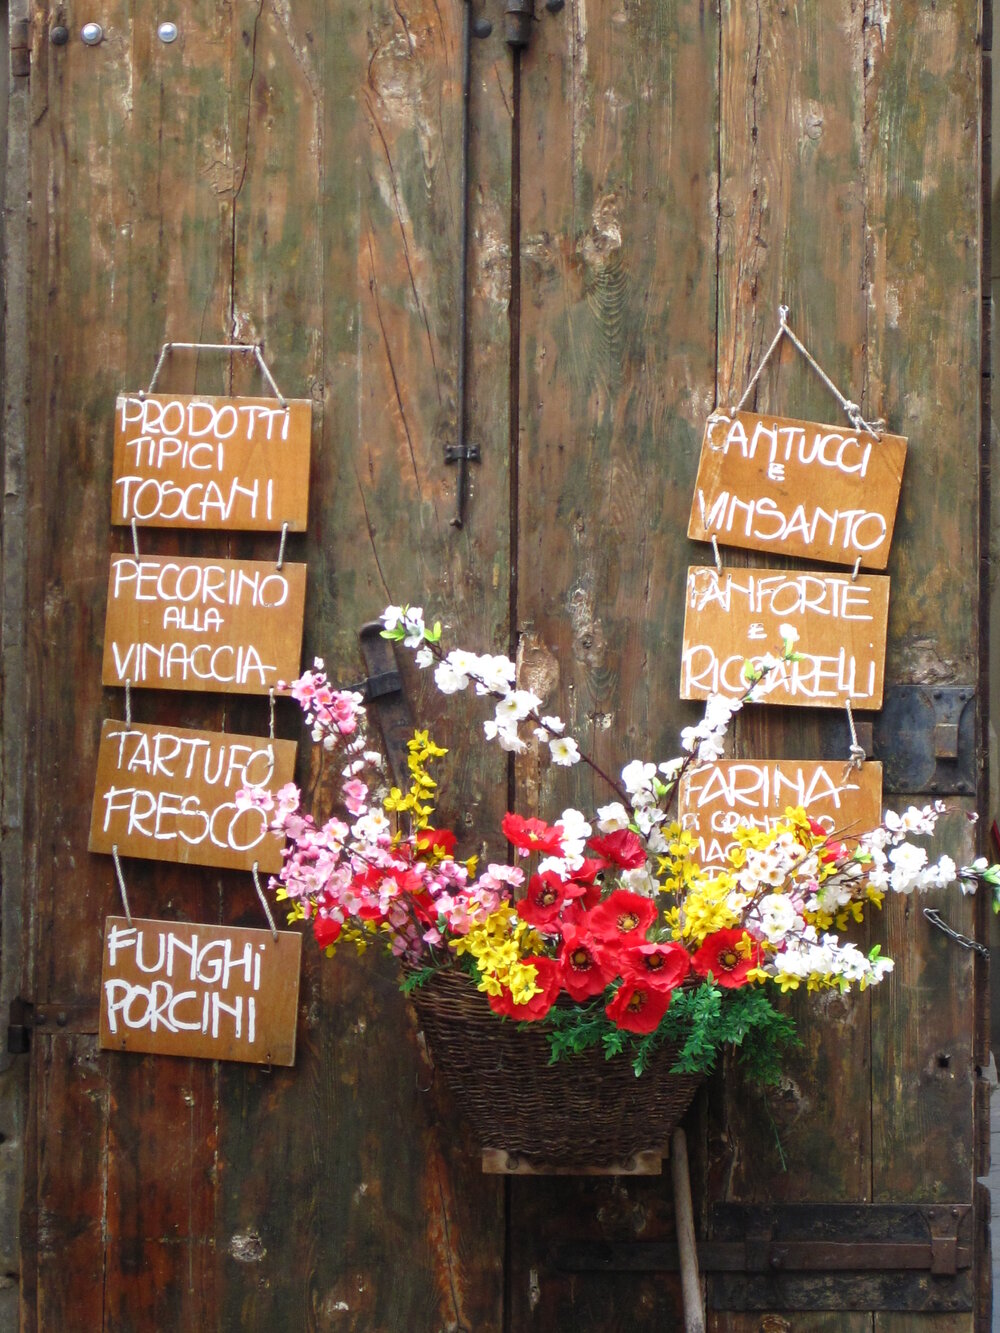 Shop signs in Tuscany